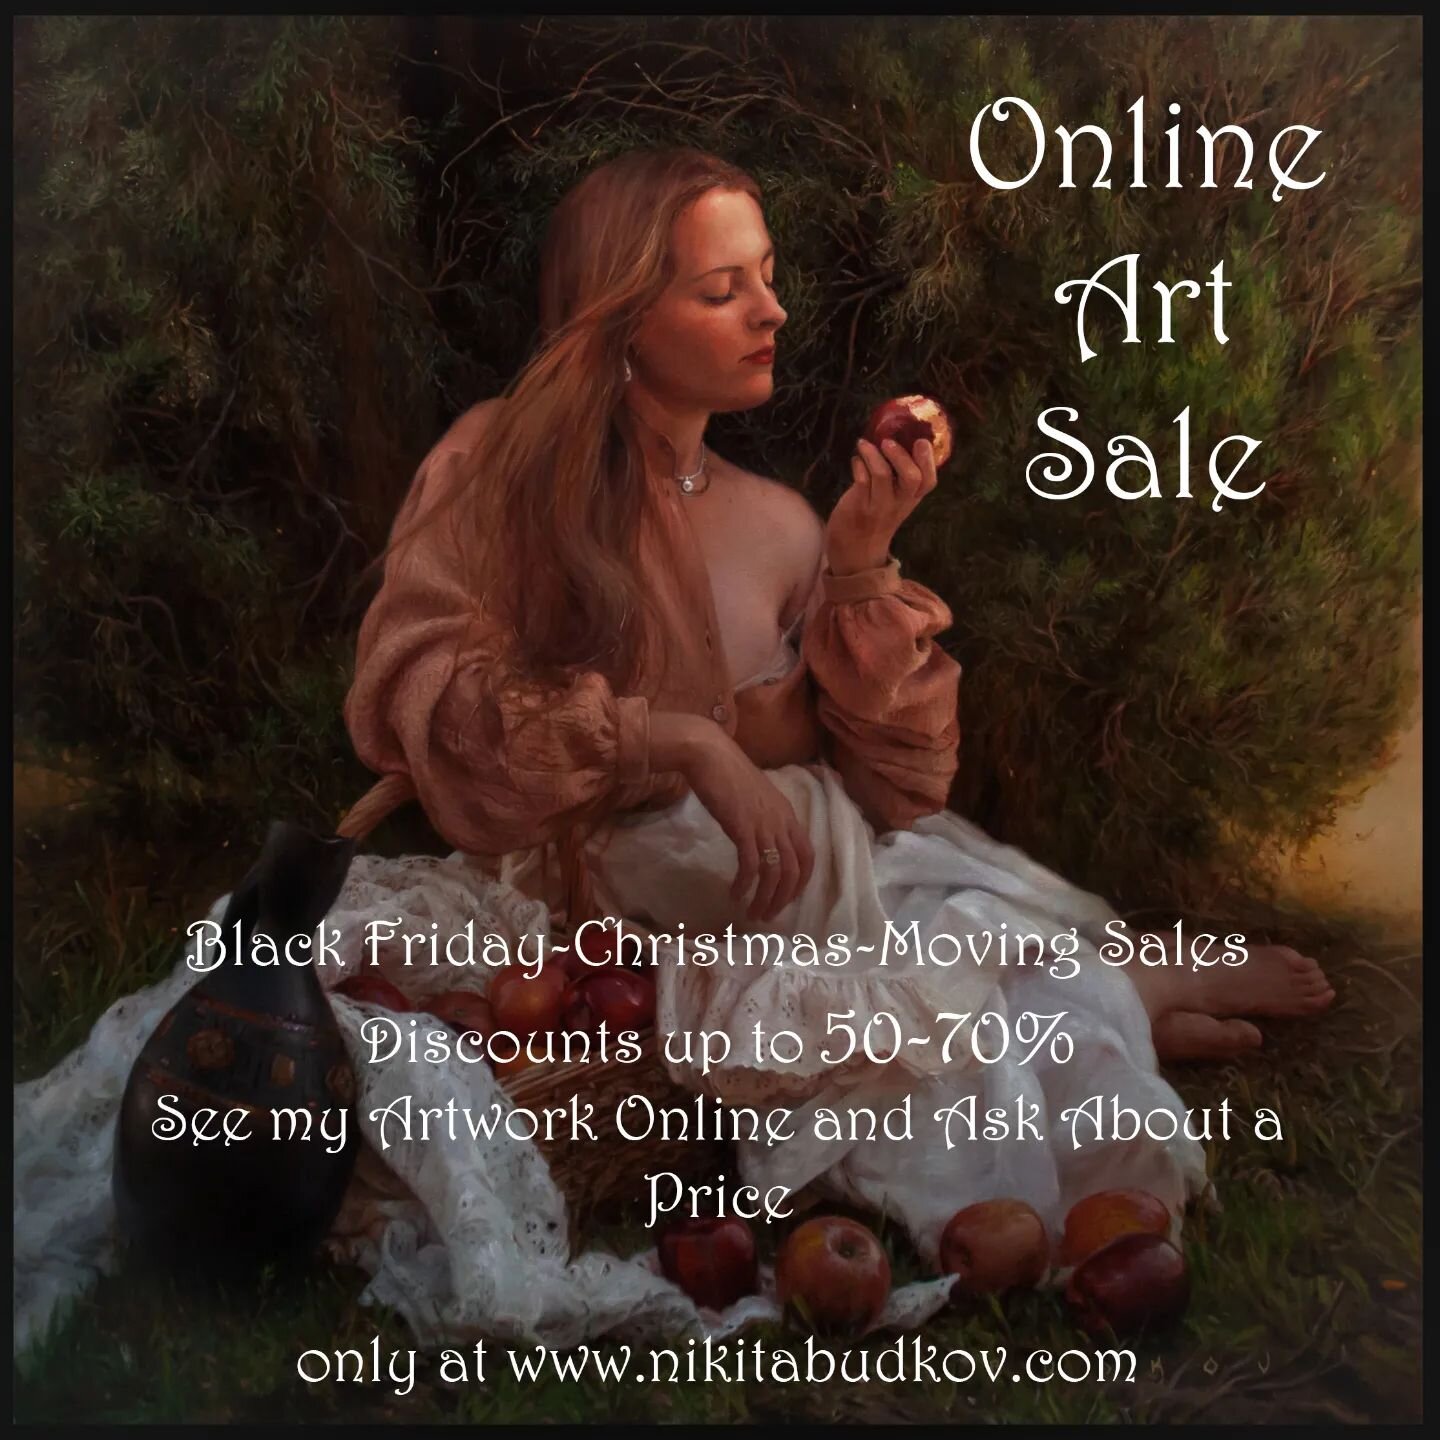 🇺🇸 I am moving out of California!
It is your chance to buy a piece of artwork while it is affordable on Black Friday-Christmas-Moving discount. Go to www.nikitabudkov.com (or tap on the link in my bio) and claim what should be yours. Shipping in th